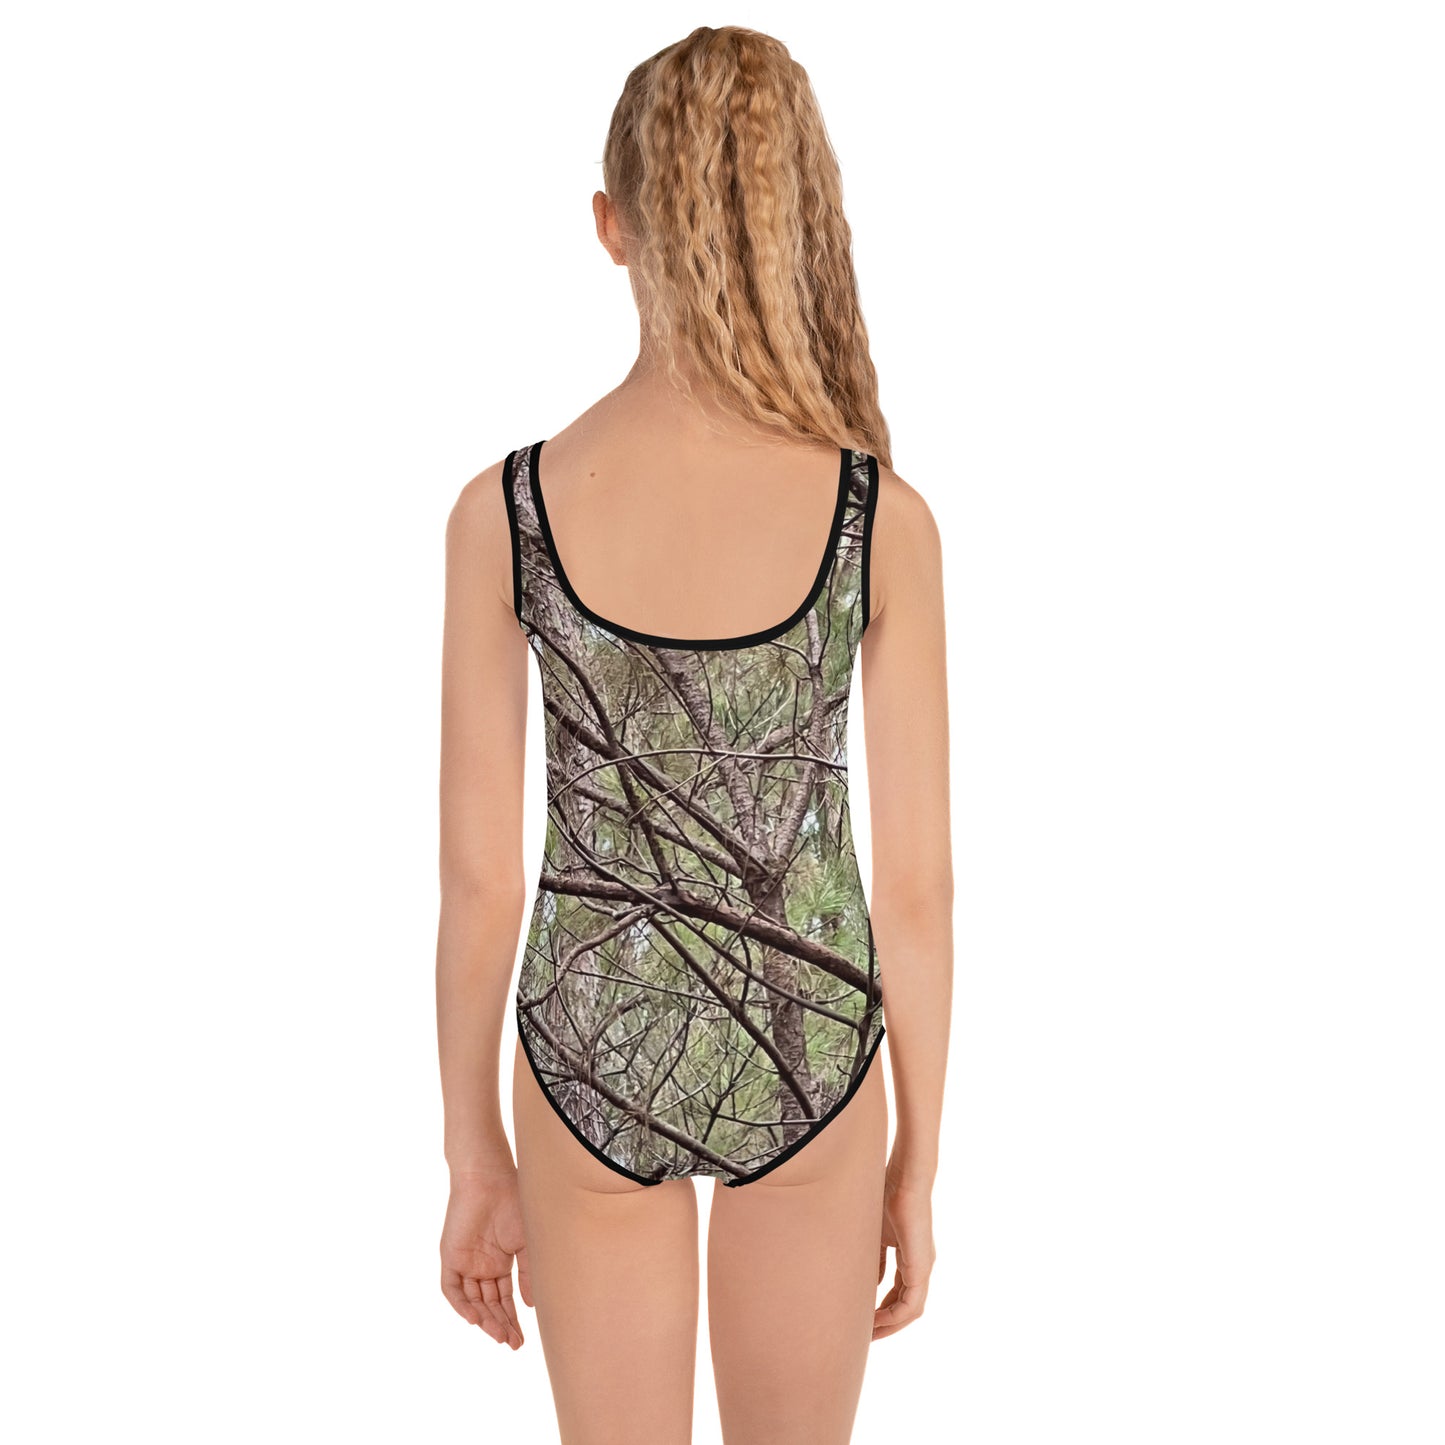 Southern Cameaux Kids Swimsuit